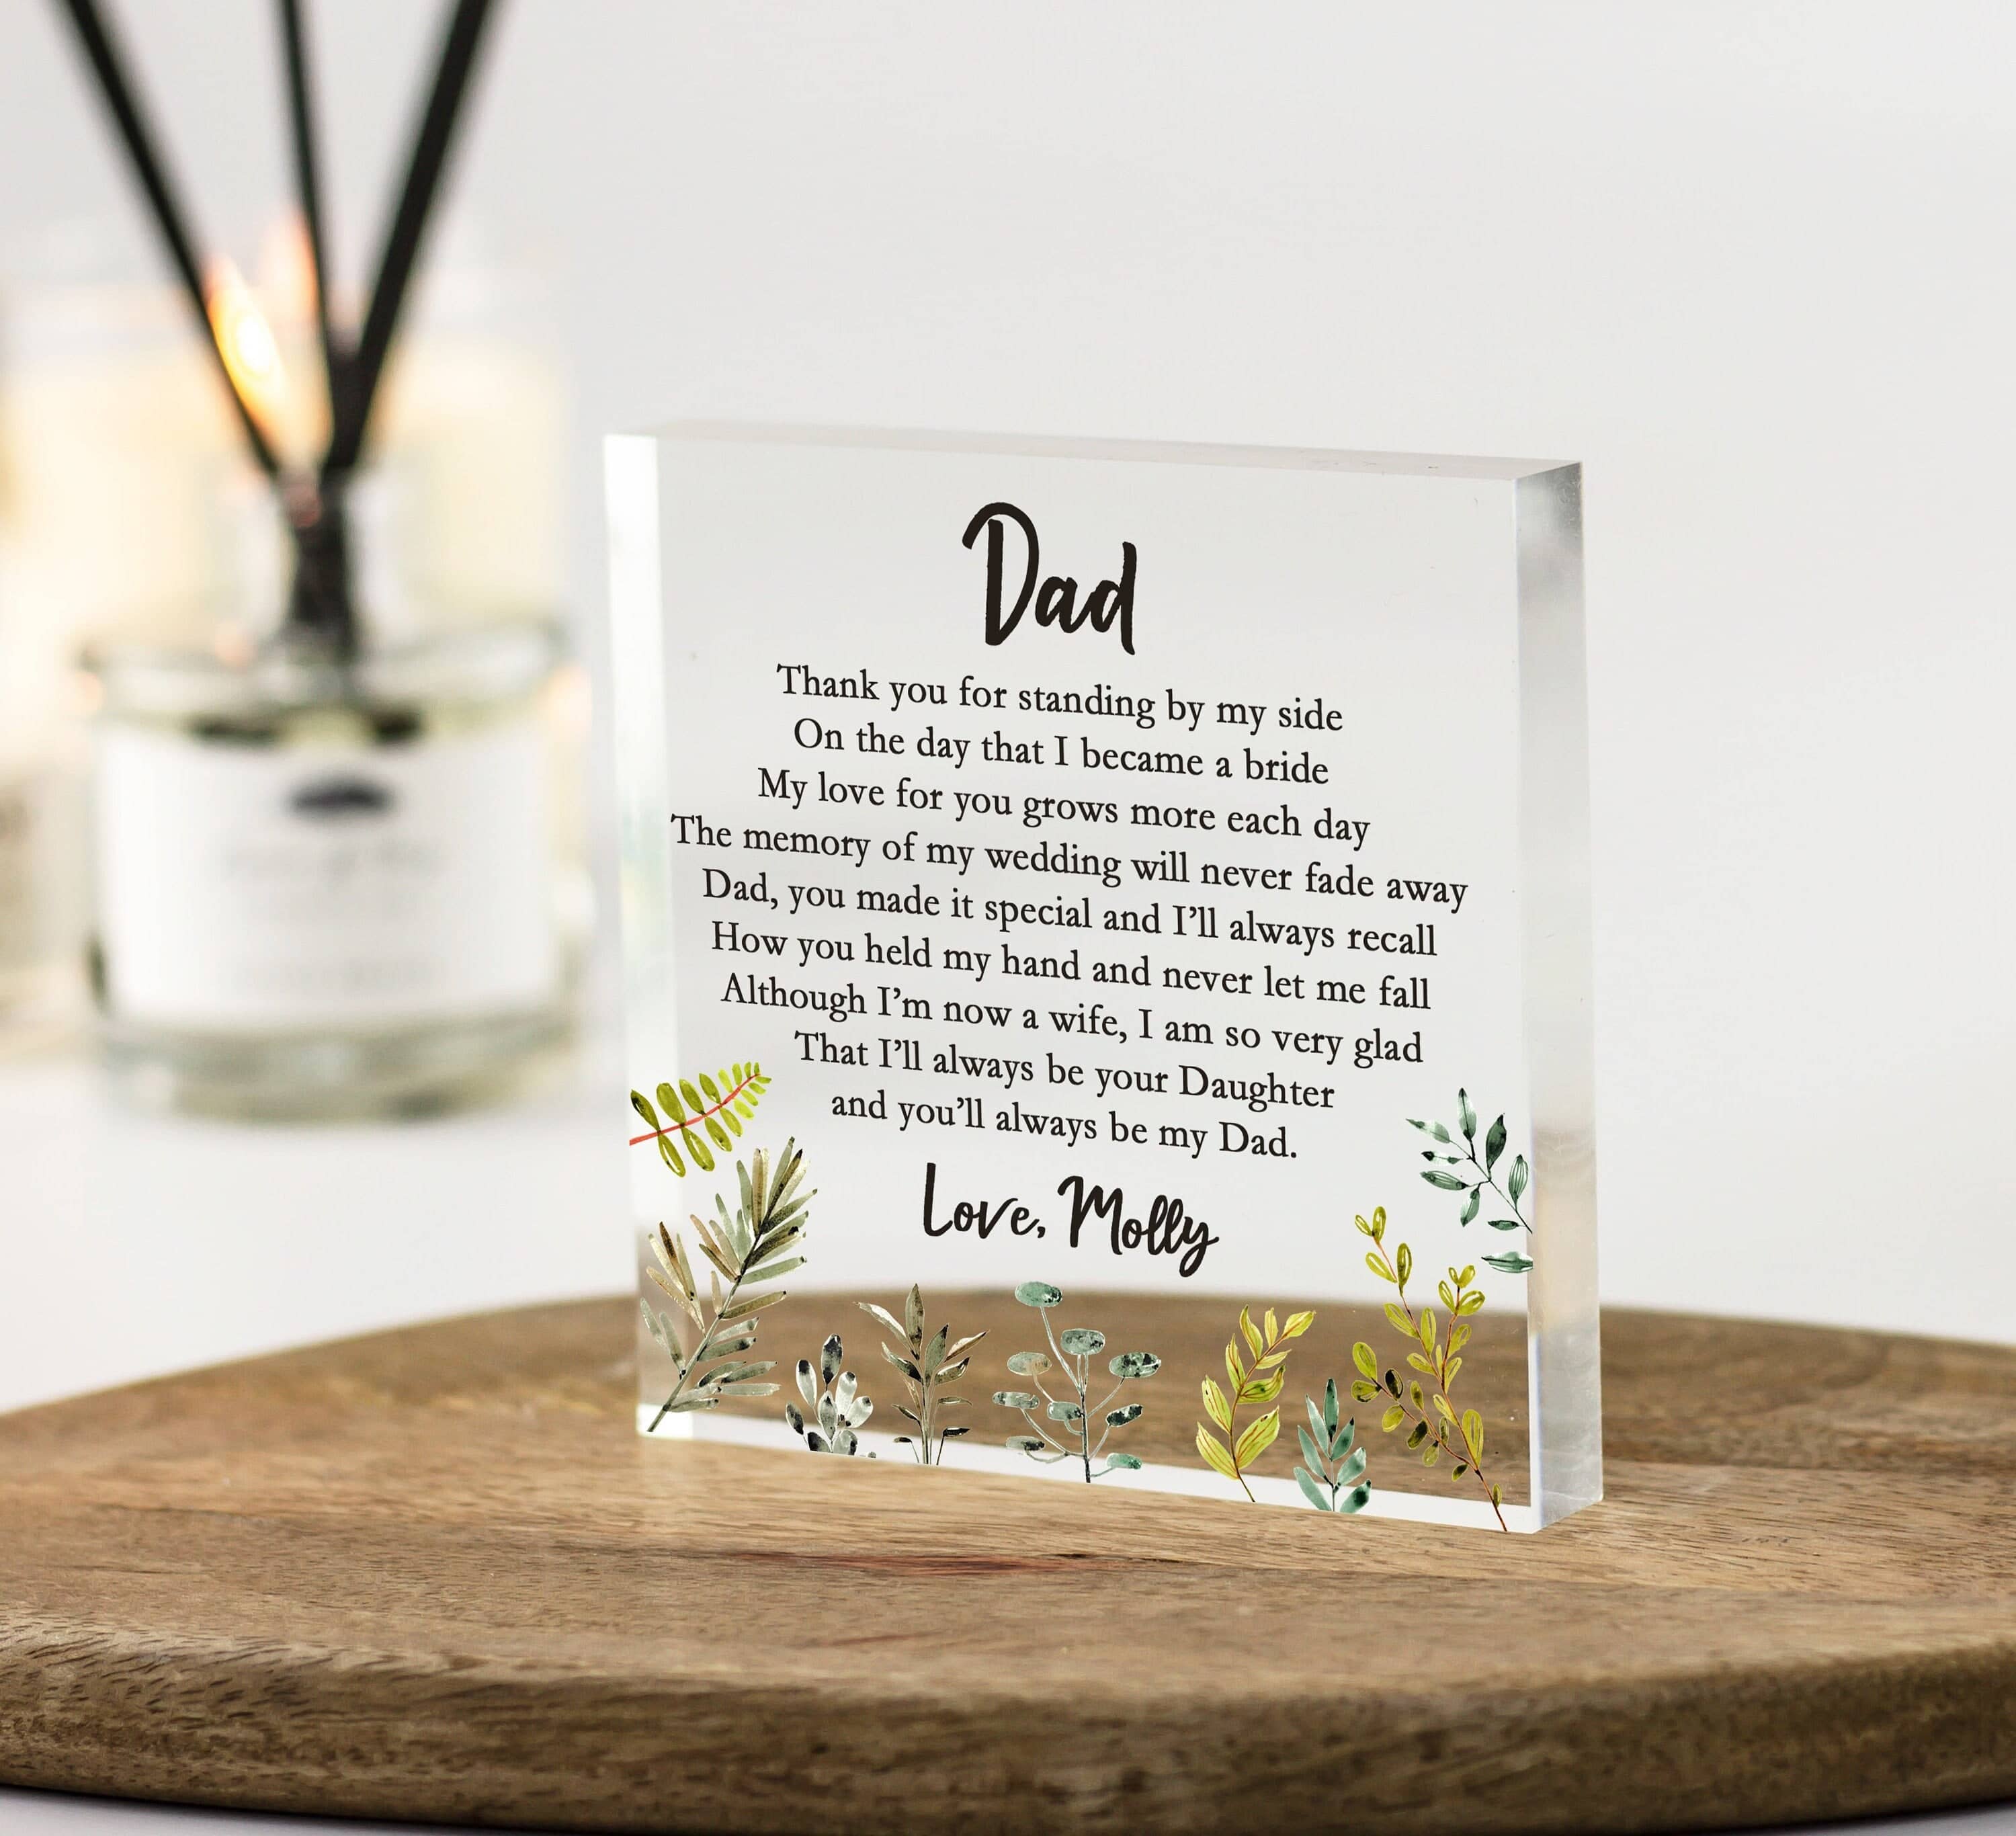 Father of the Bride Gift from Daughter, Daughter to Dad Gift, Gifts From Bride, Thank you Poem Father of Bride Gifts, Wedding Day Keepsake